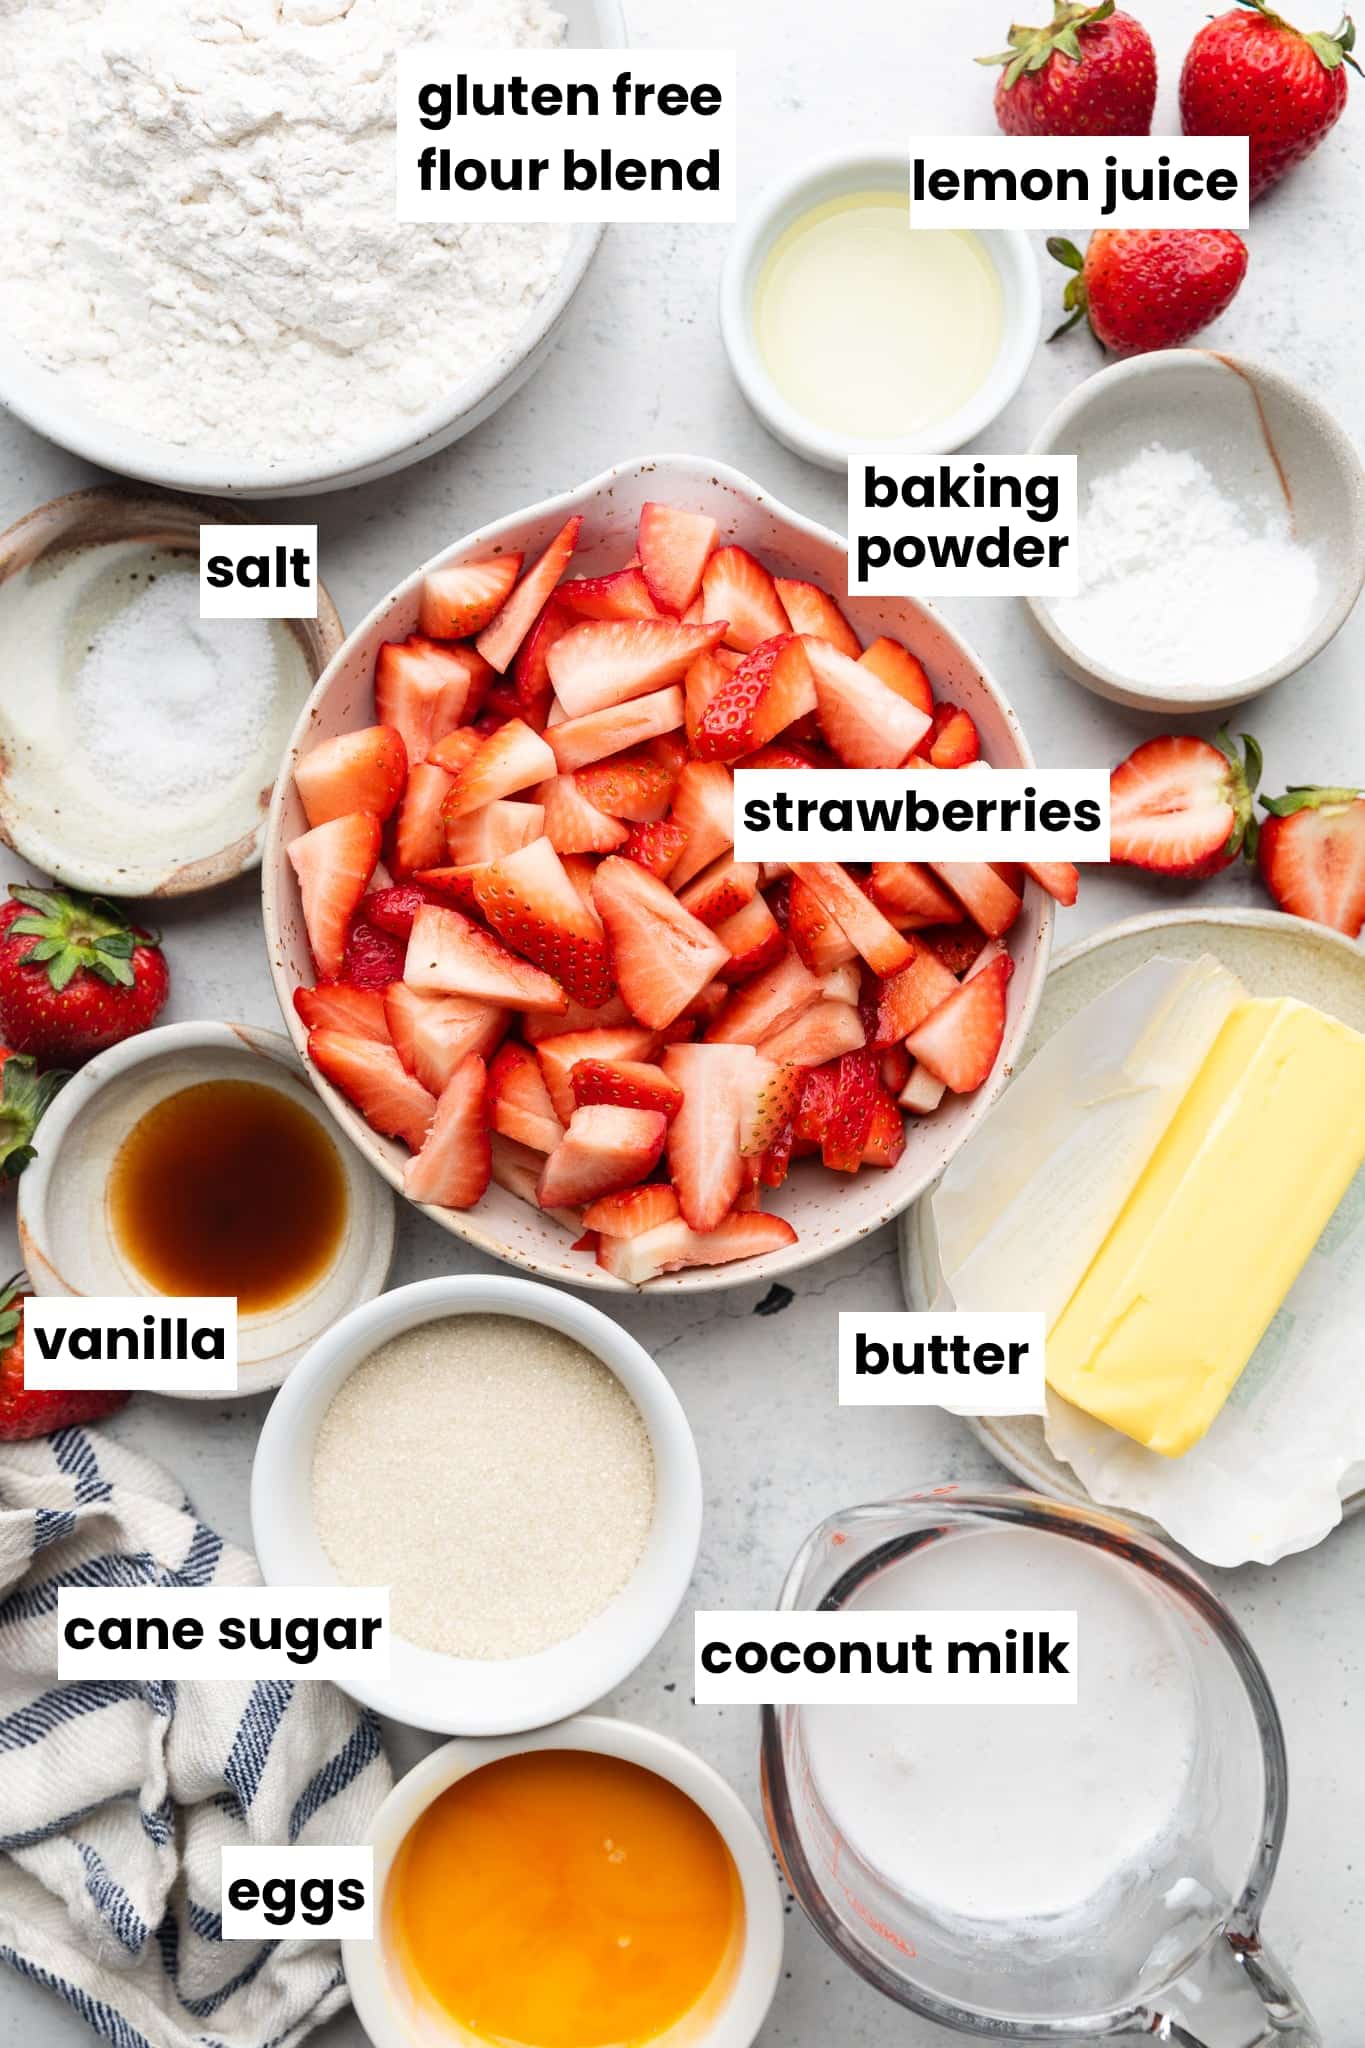 Bowl of ingredients including strawberries, butter, sugar, and milk.